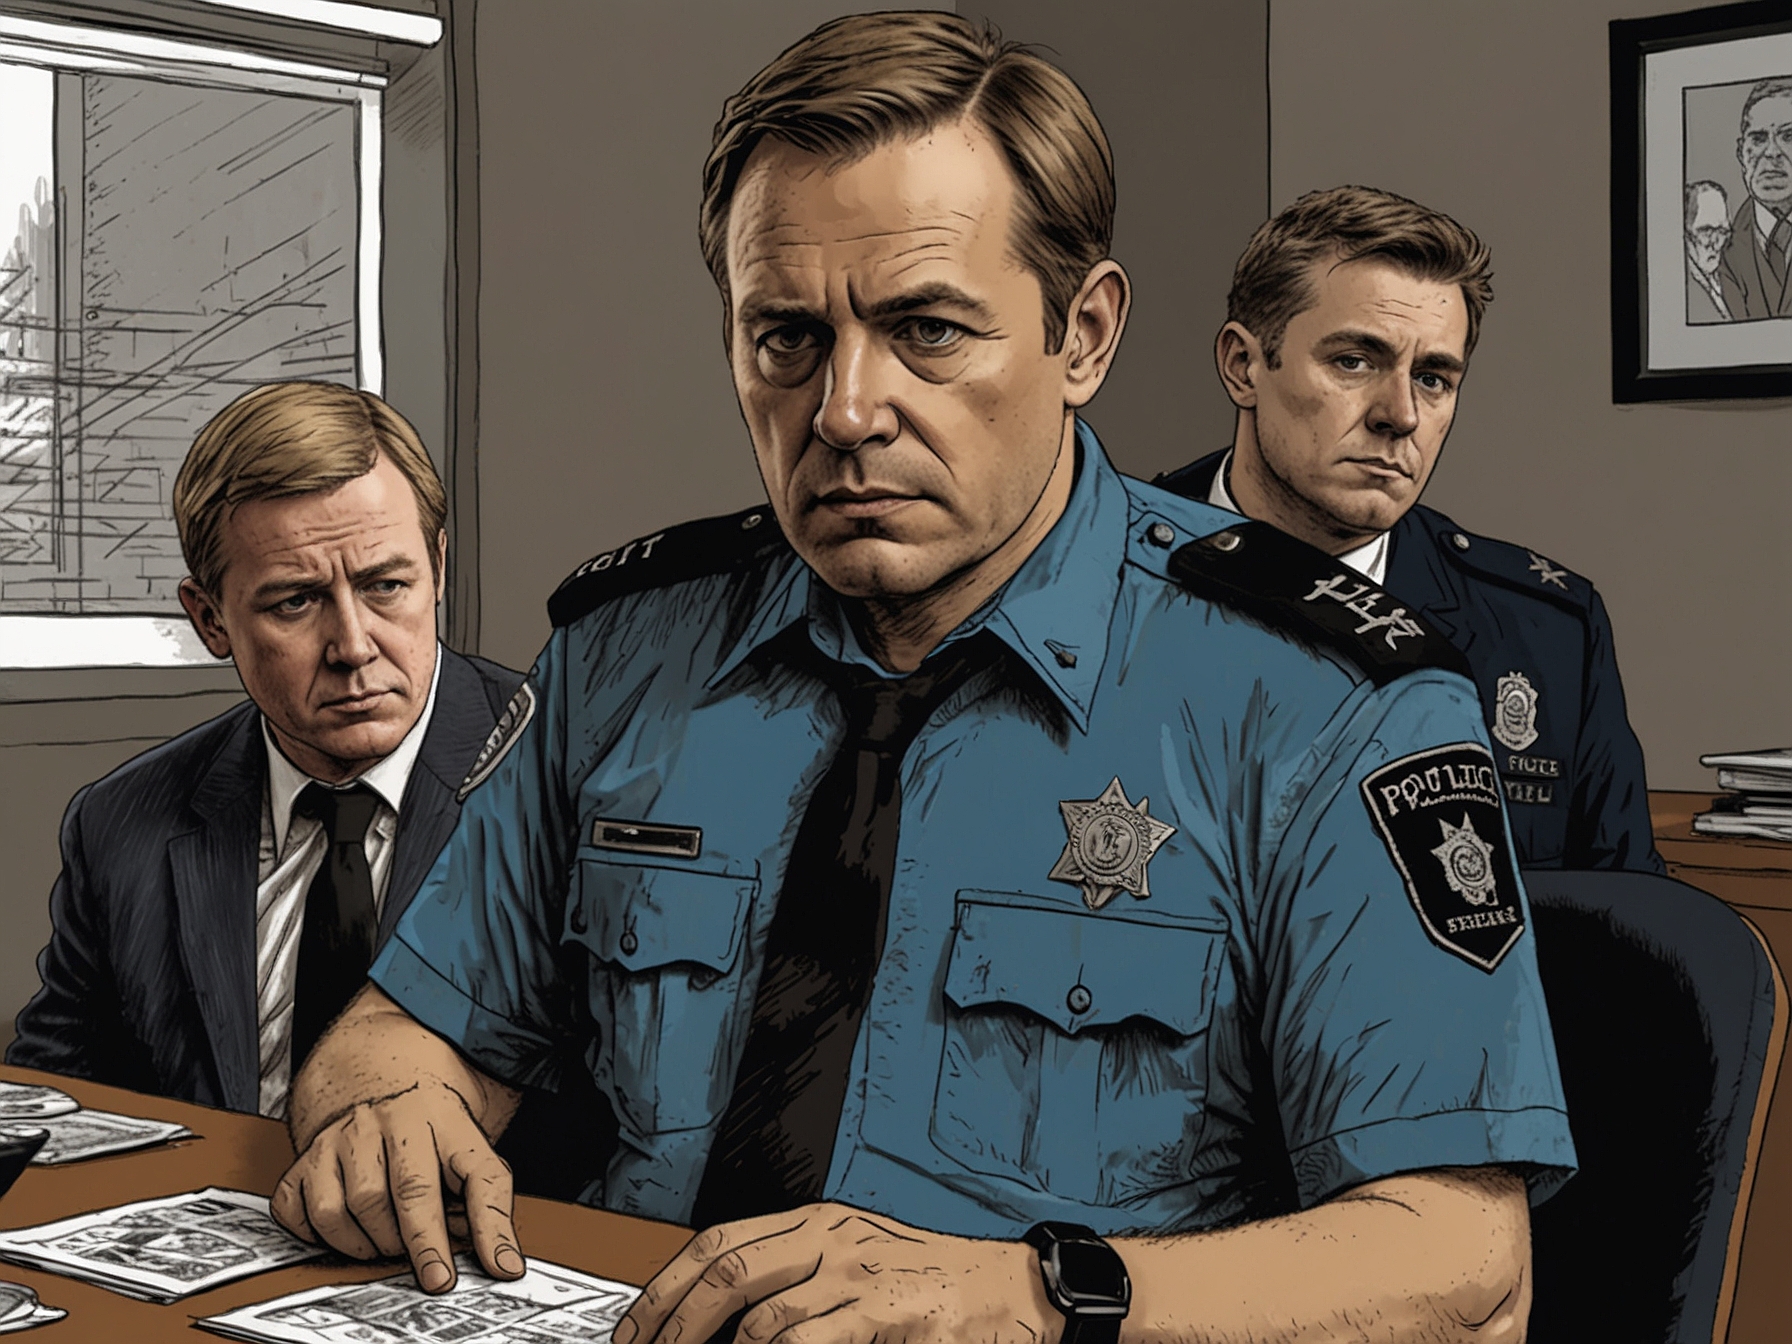 Illustration of police officers caught in a betting scandal on the General Election, highlighting the serious breach of ethical and legal protocols involved.